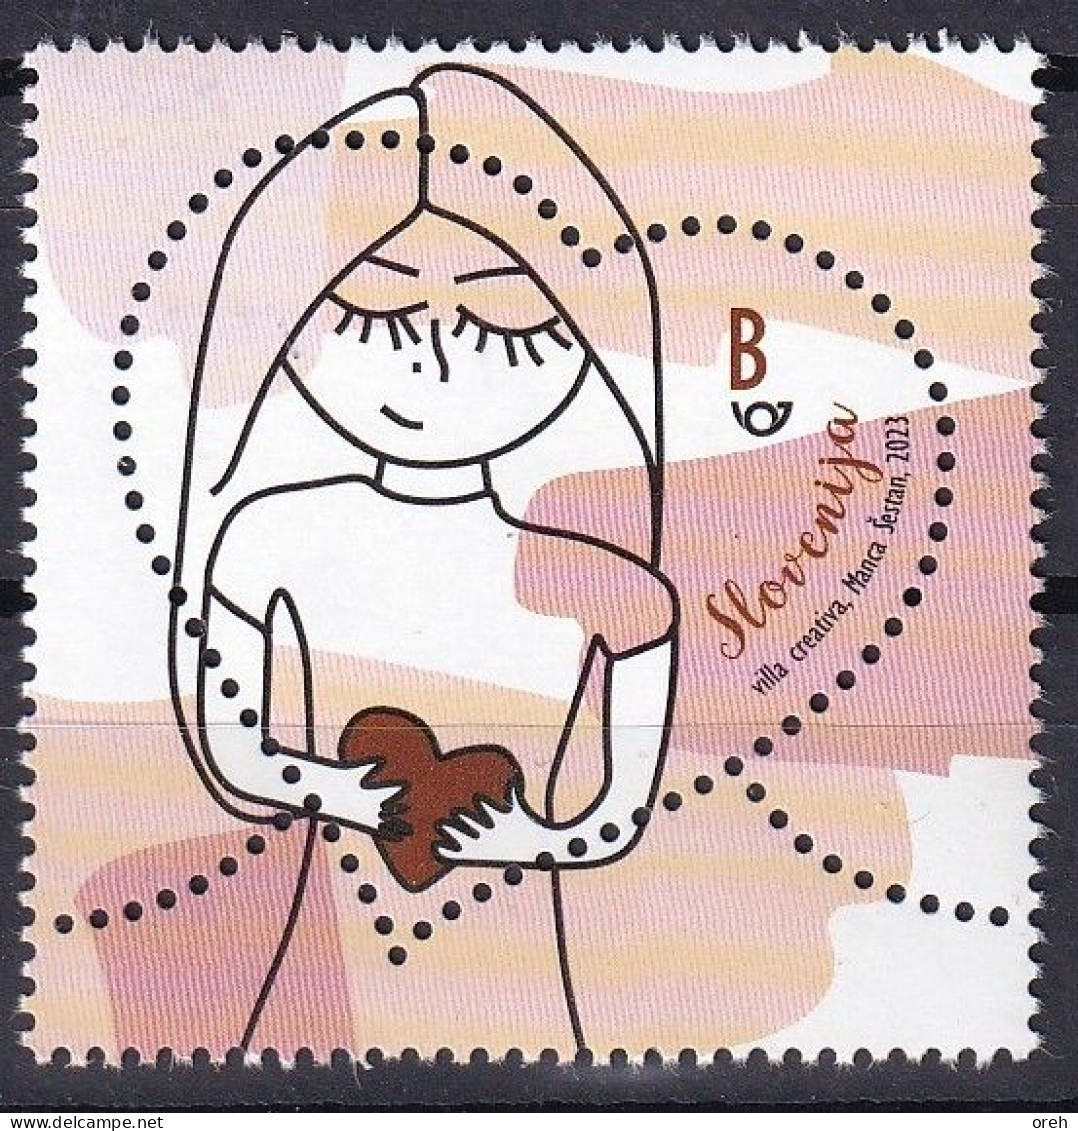 SLOVENIA,SLOWENIEN 2023,LOVE STAMPS,GREETING STAMP,LOVE GIVES BIRTH TO LOVEHEART,,MNH - Slovenia